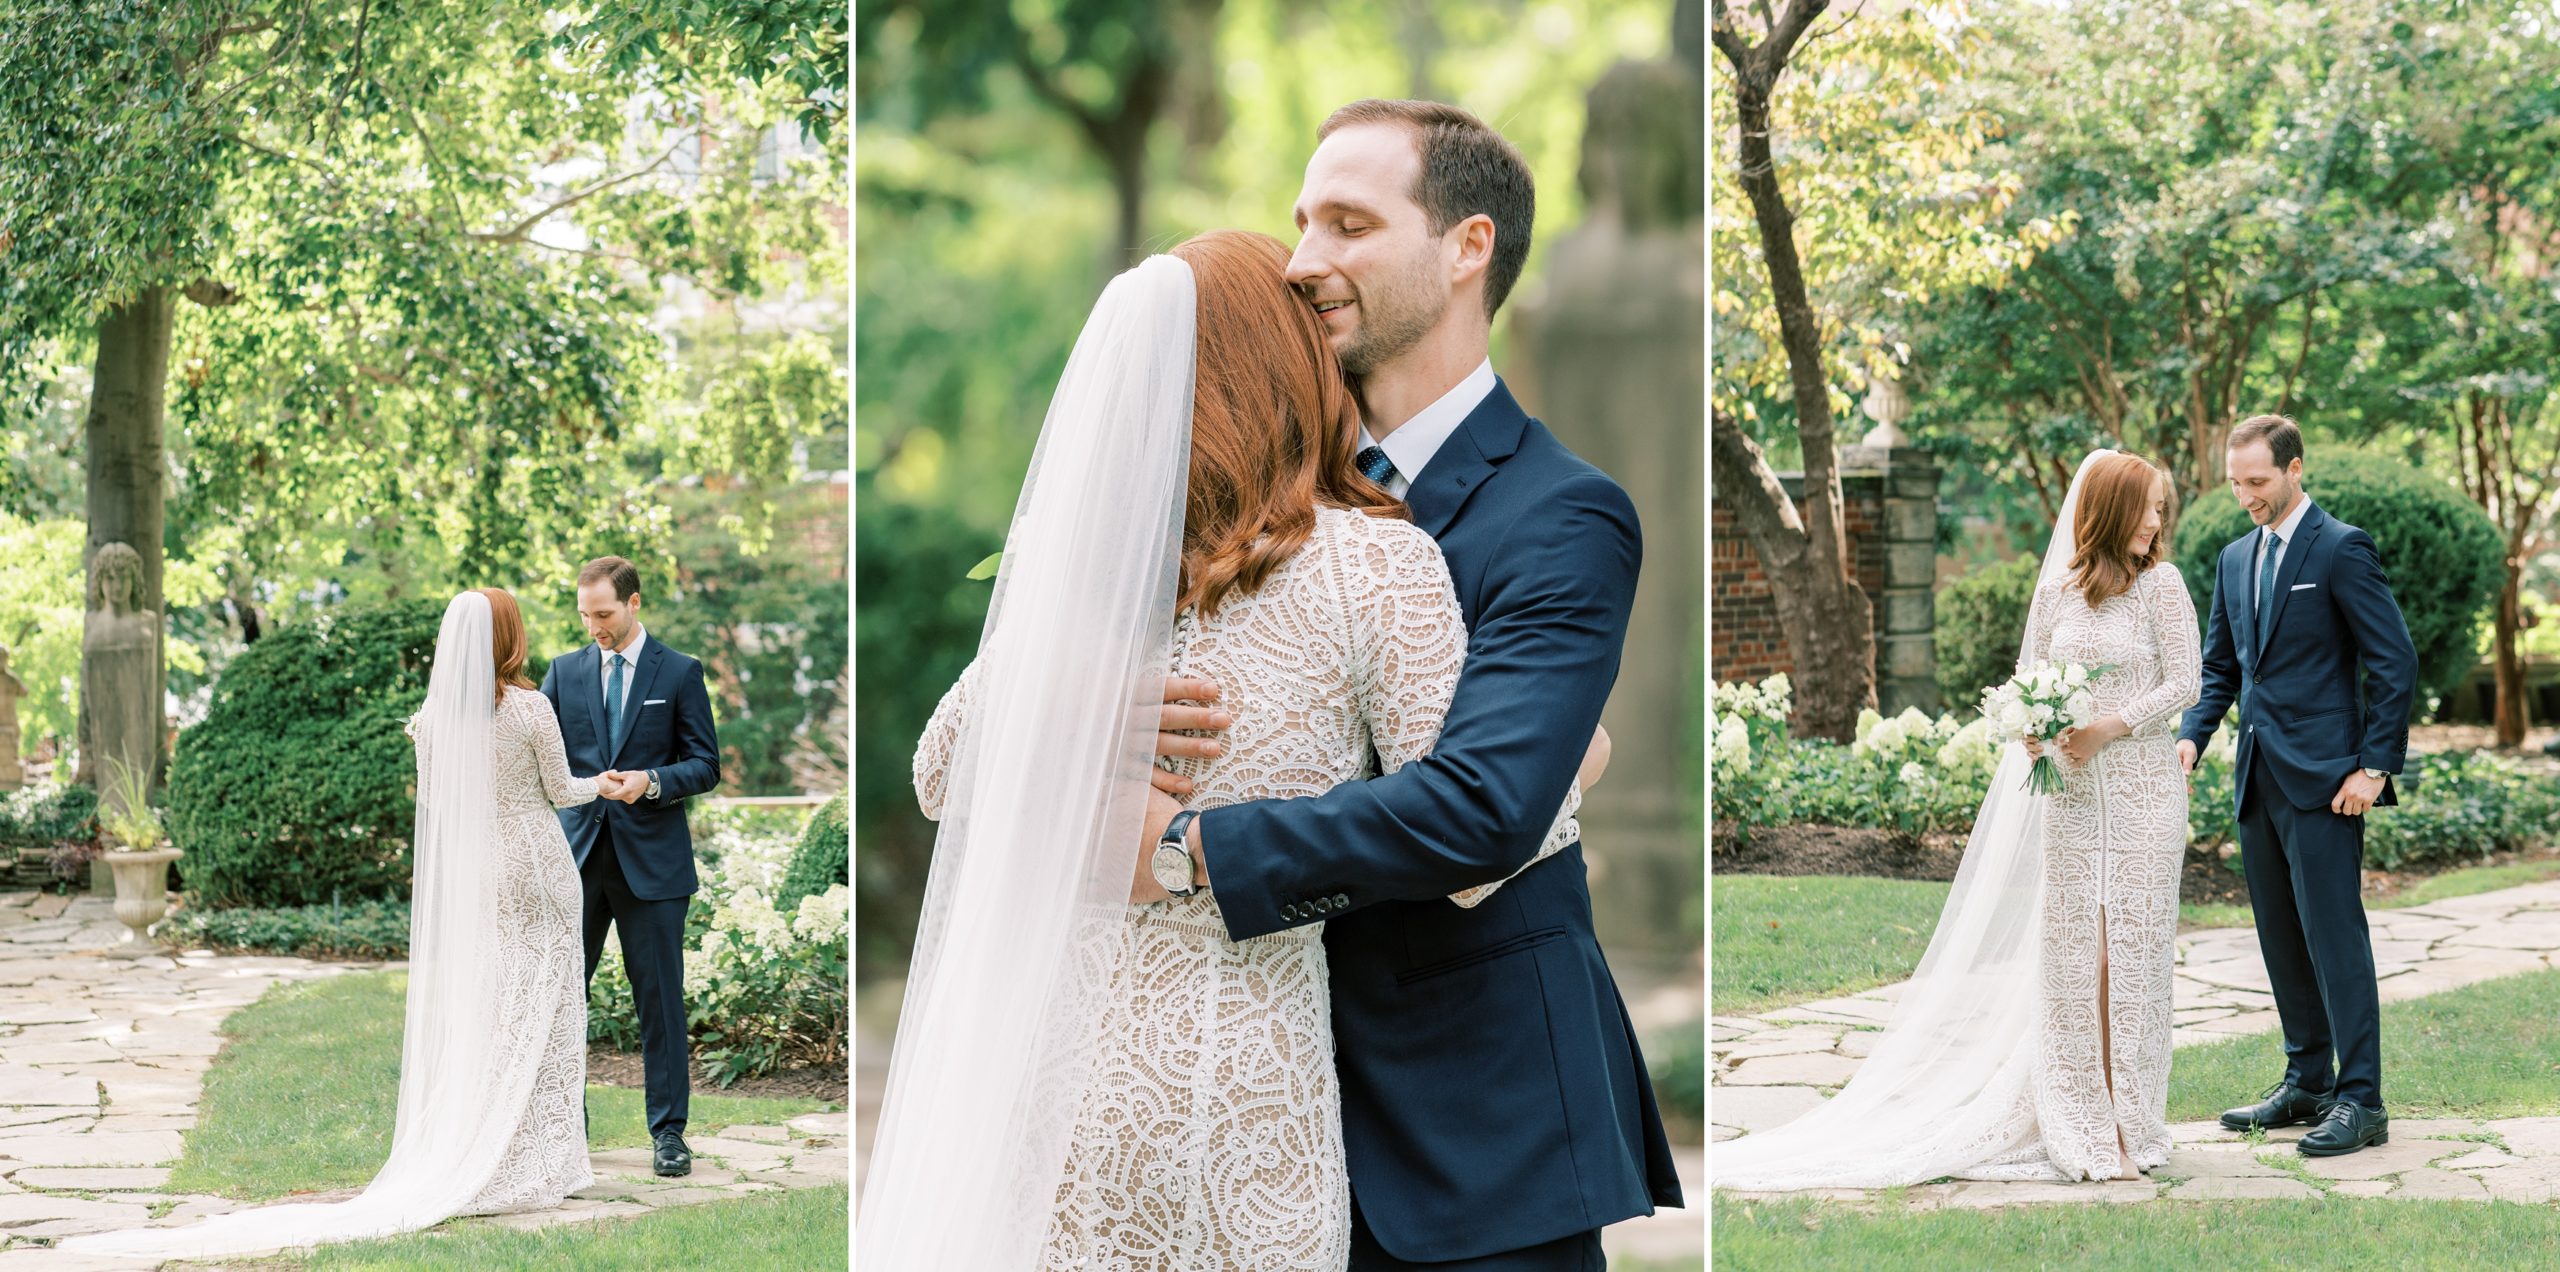 This Washington DC area wedding photographer provides information on a wedding day first look for engaged couples.